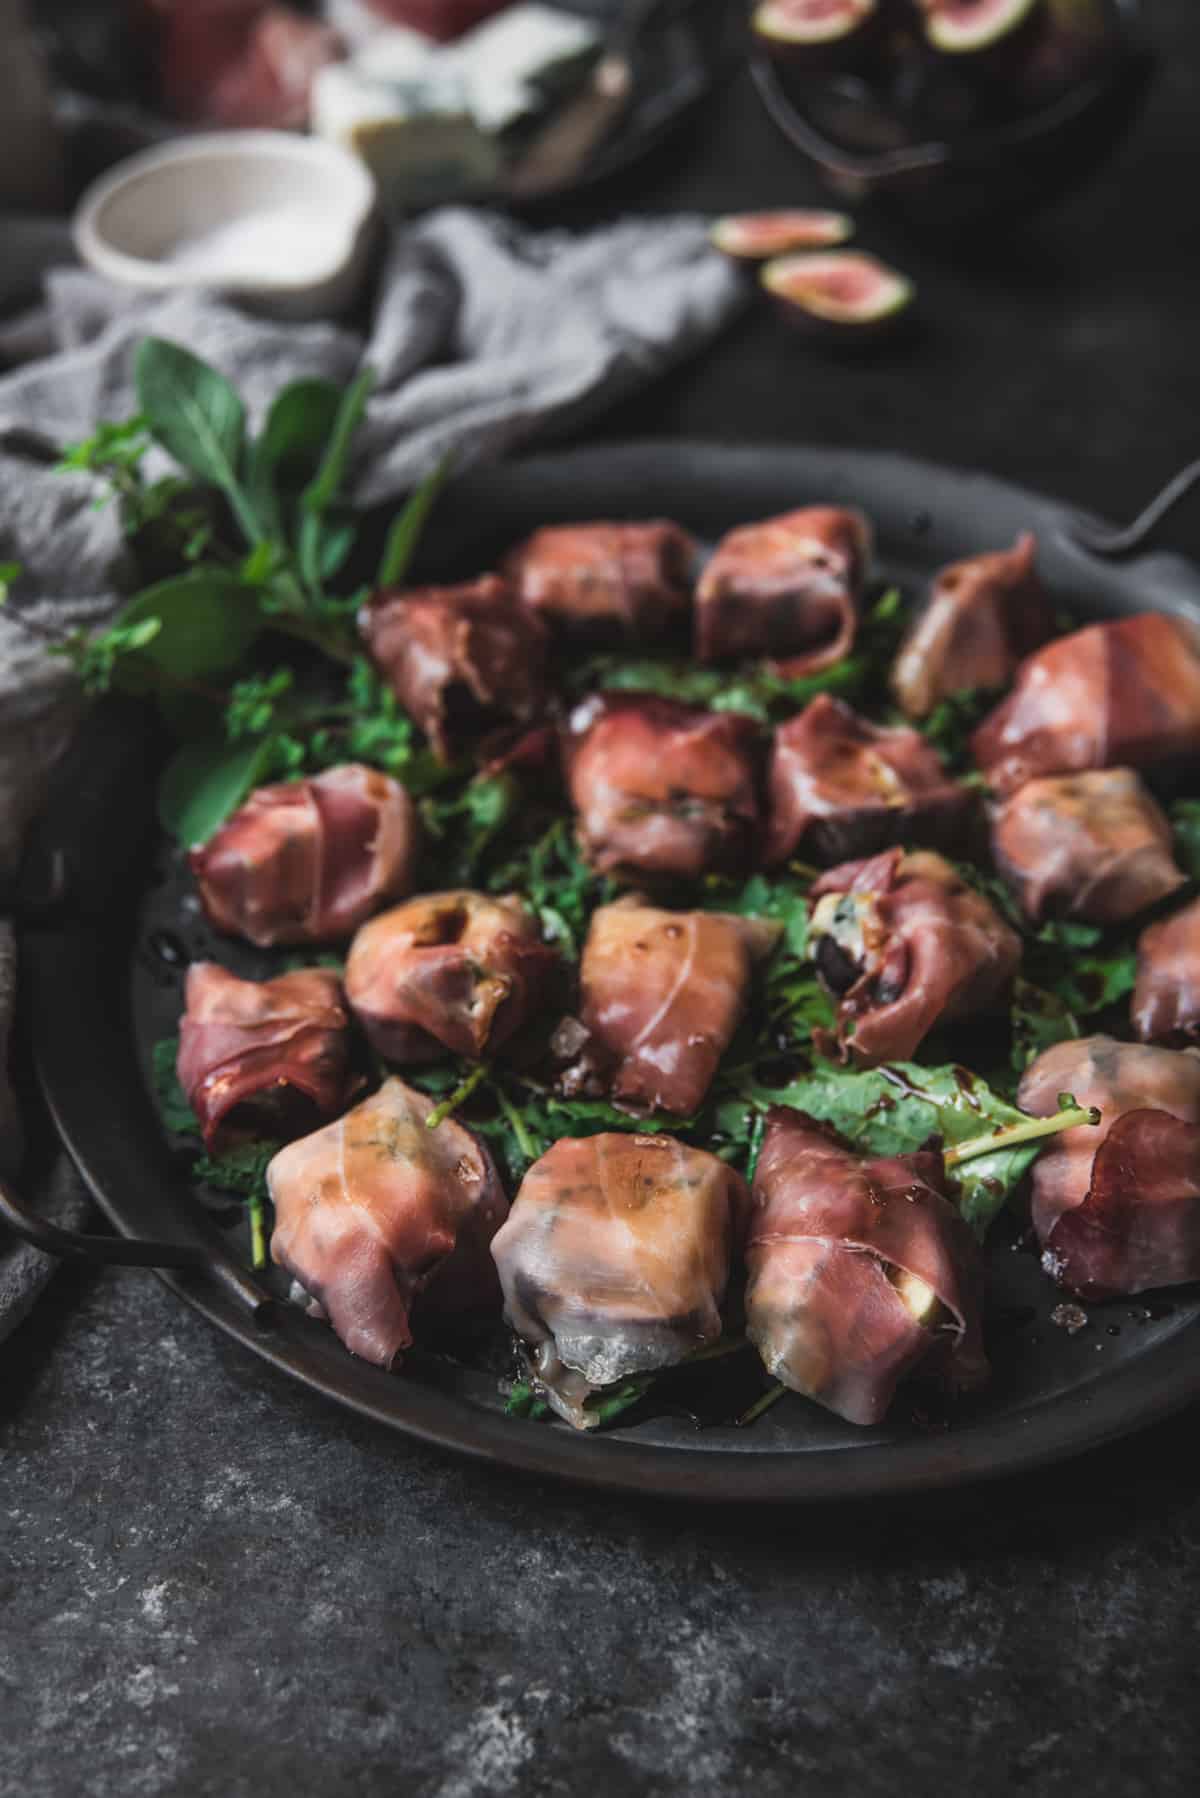 baked figs with prosciutto and blue cheese on a silver tray